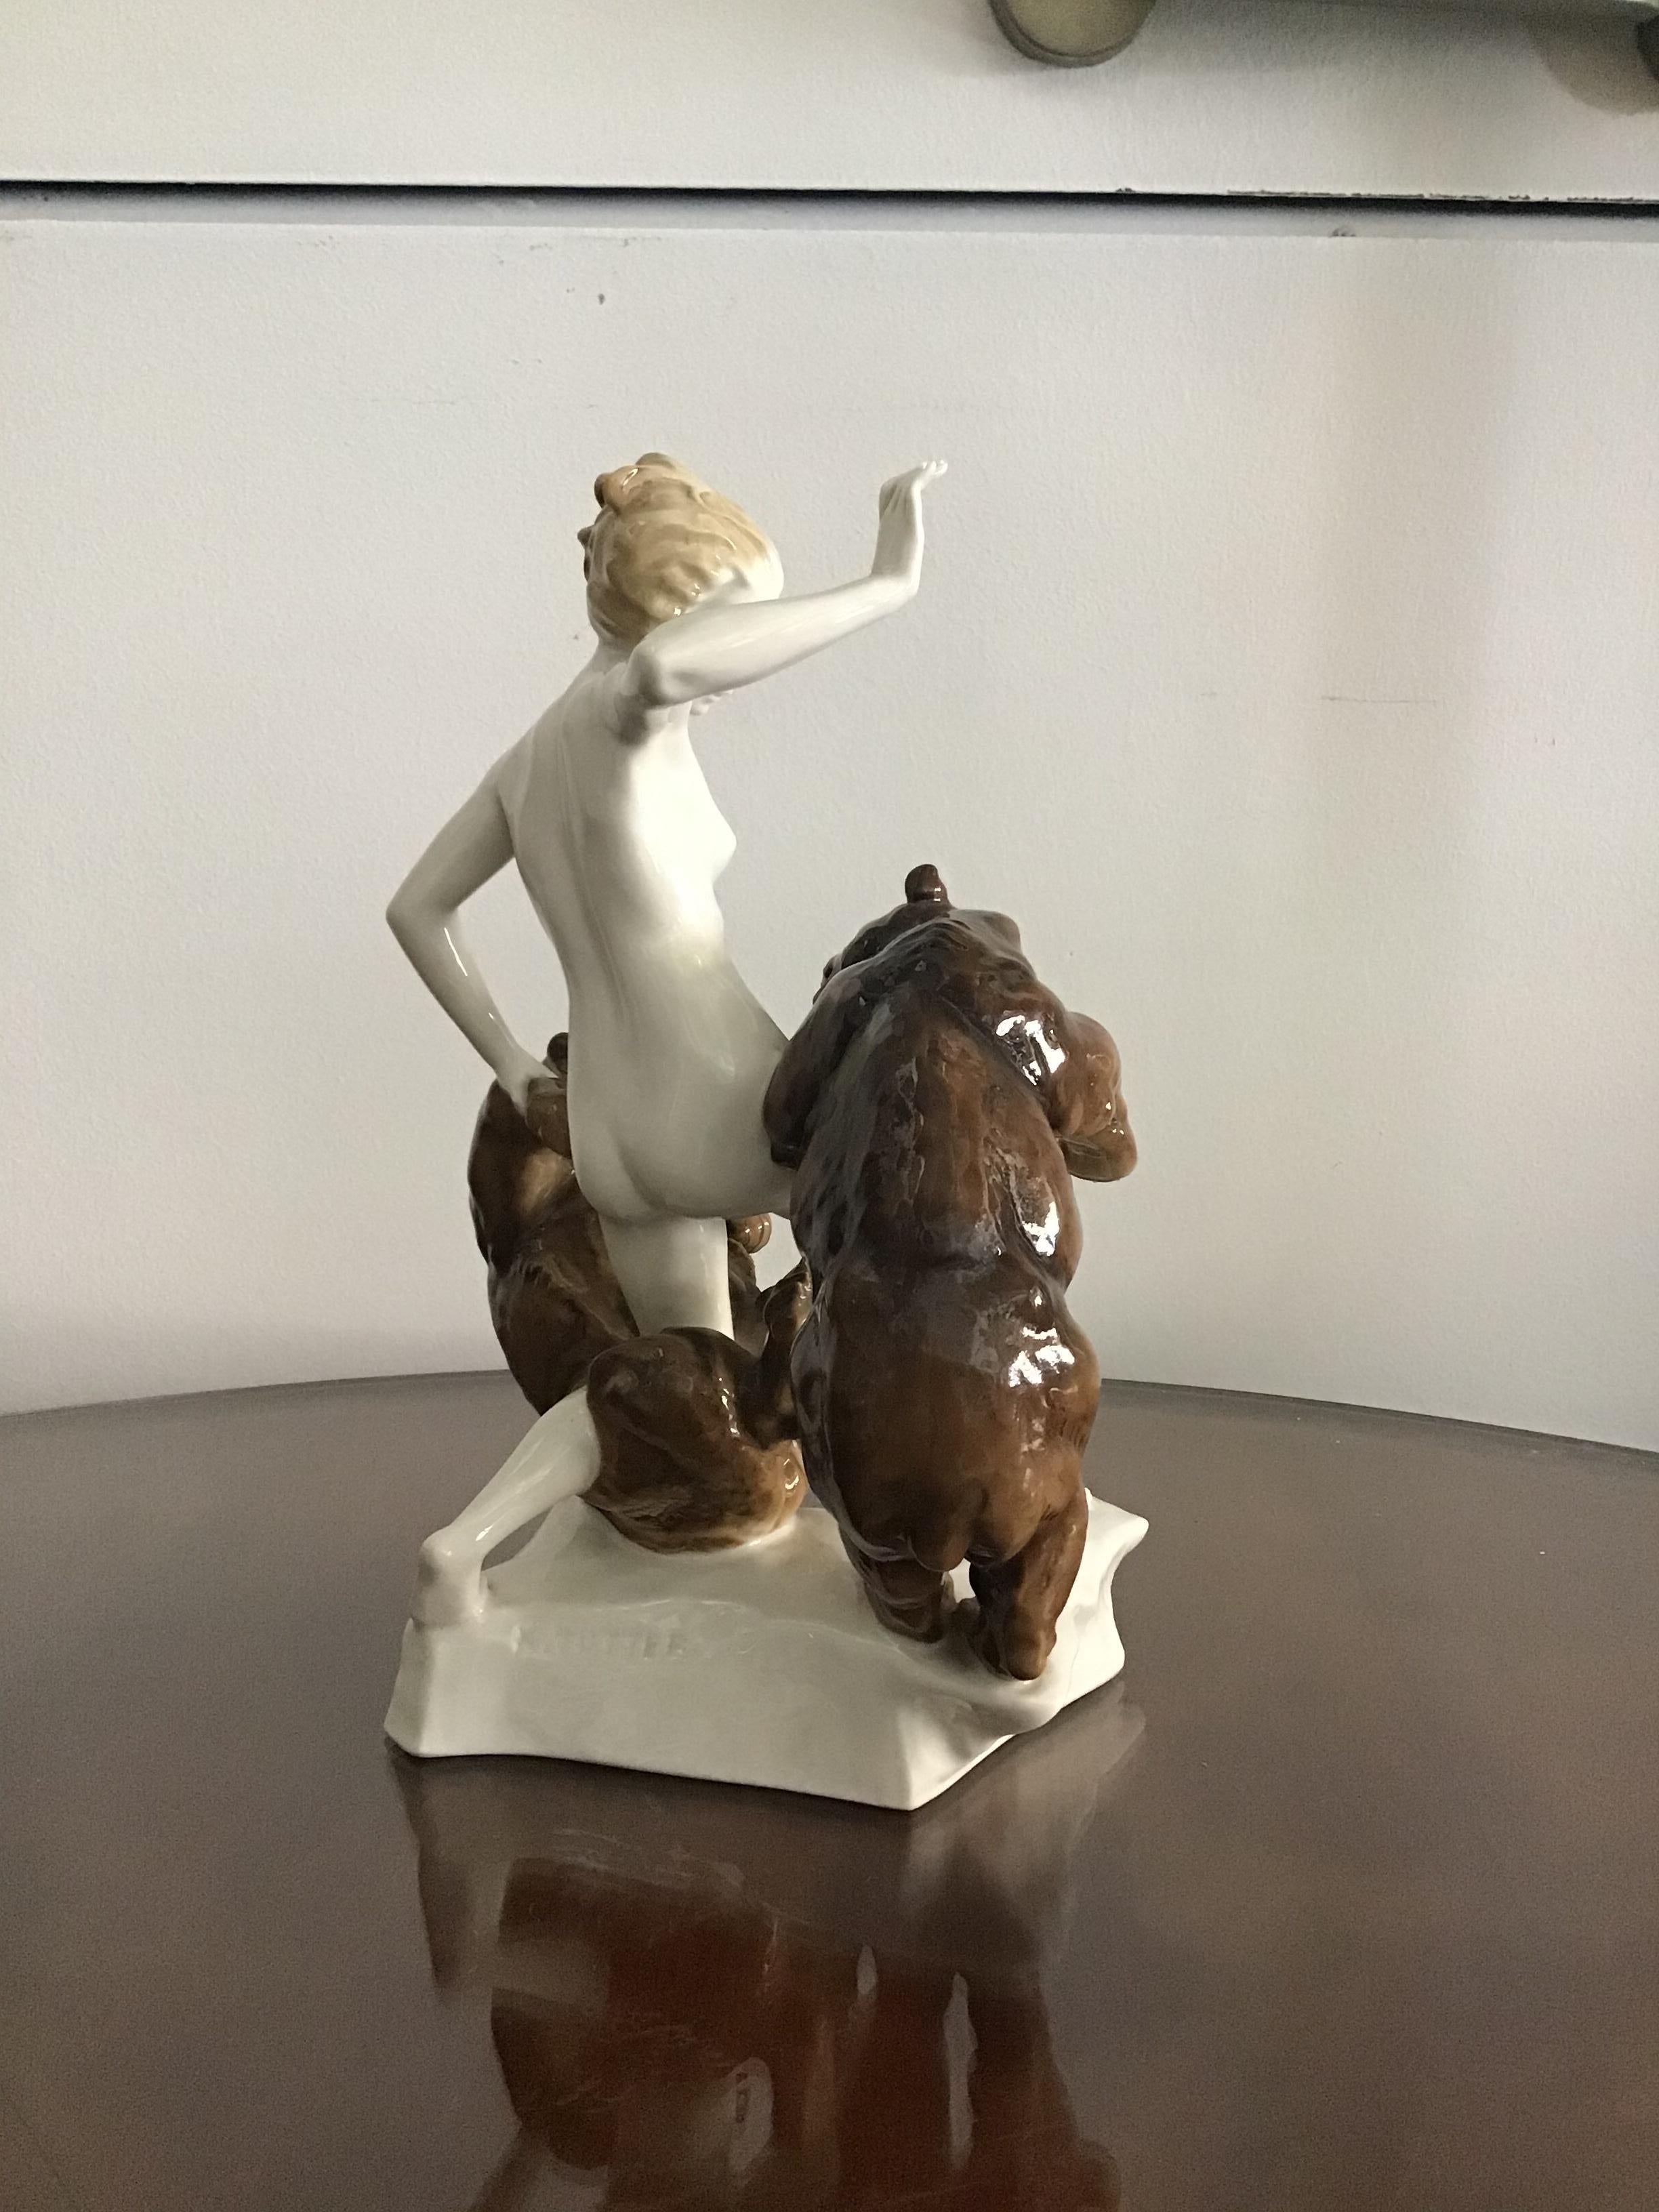 K.Tutter “Woman with Bears” Porcelain, 1940, Germany  For Sale 1